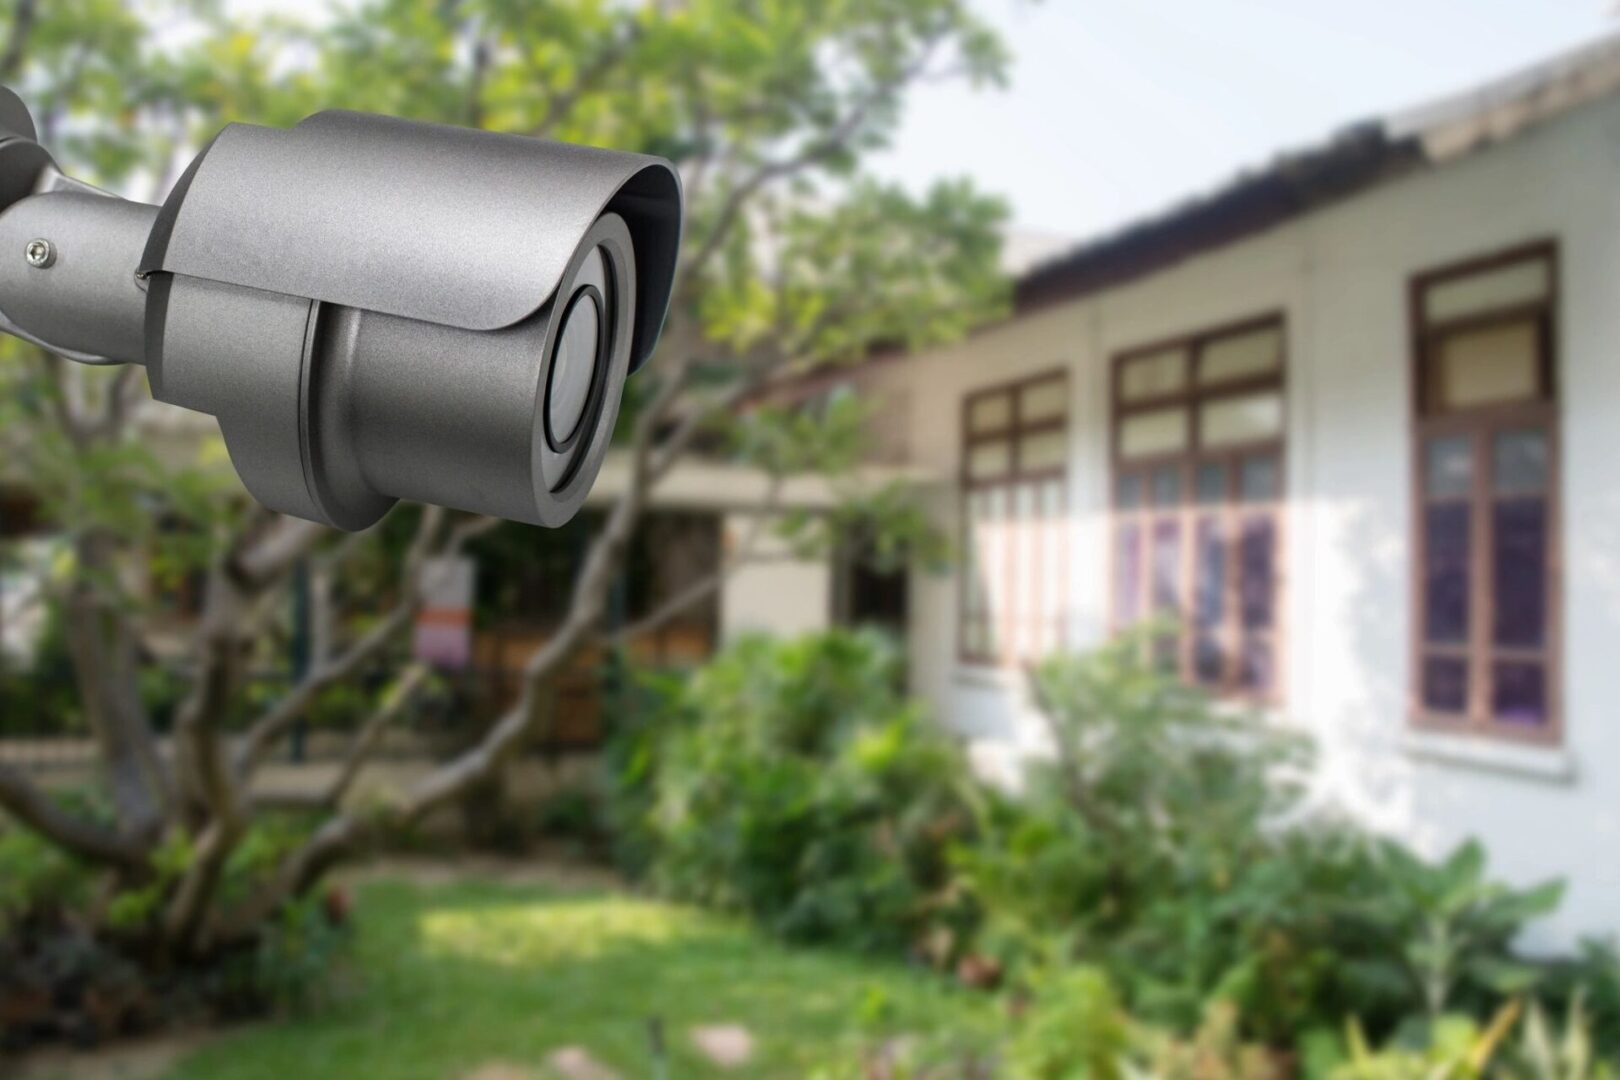 A close up of the camera on a house